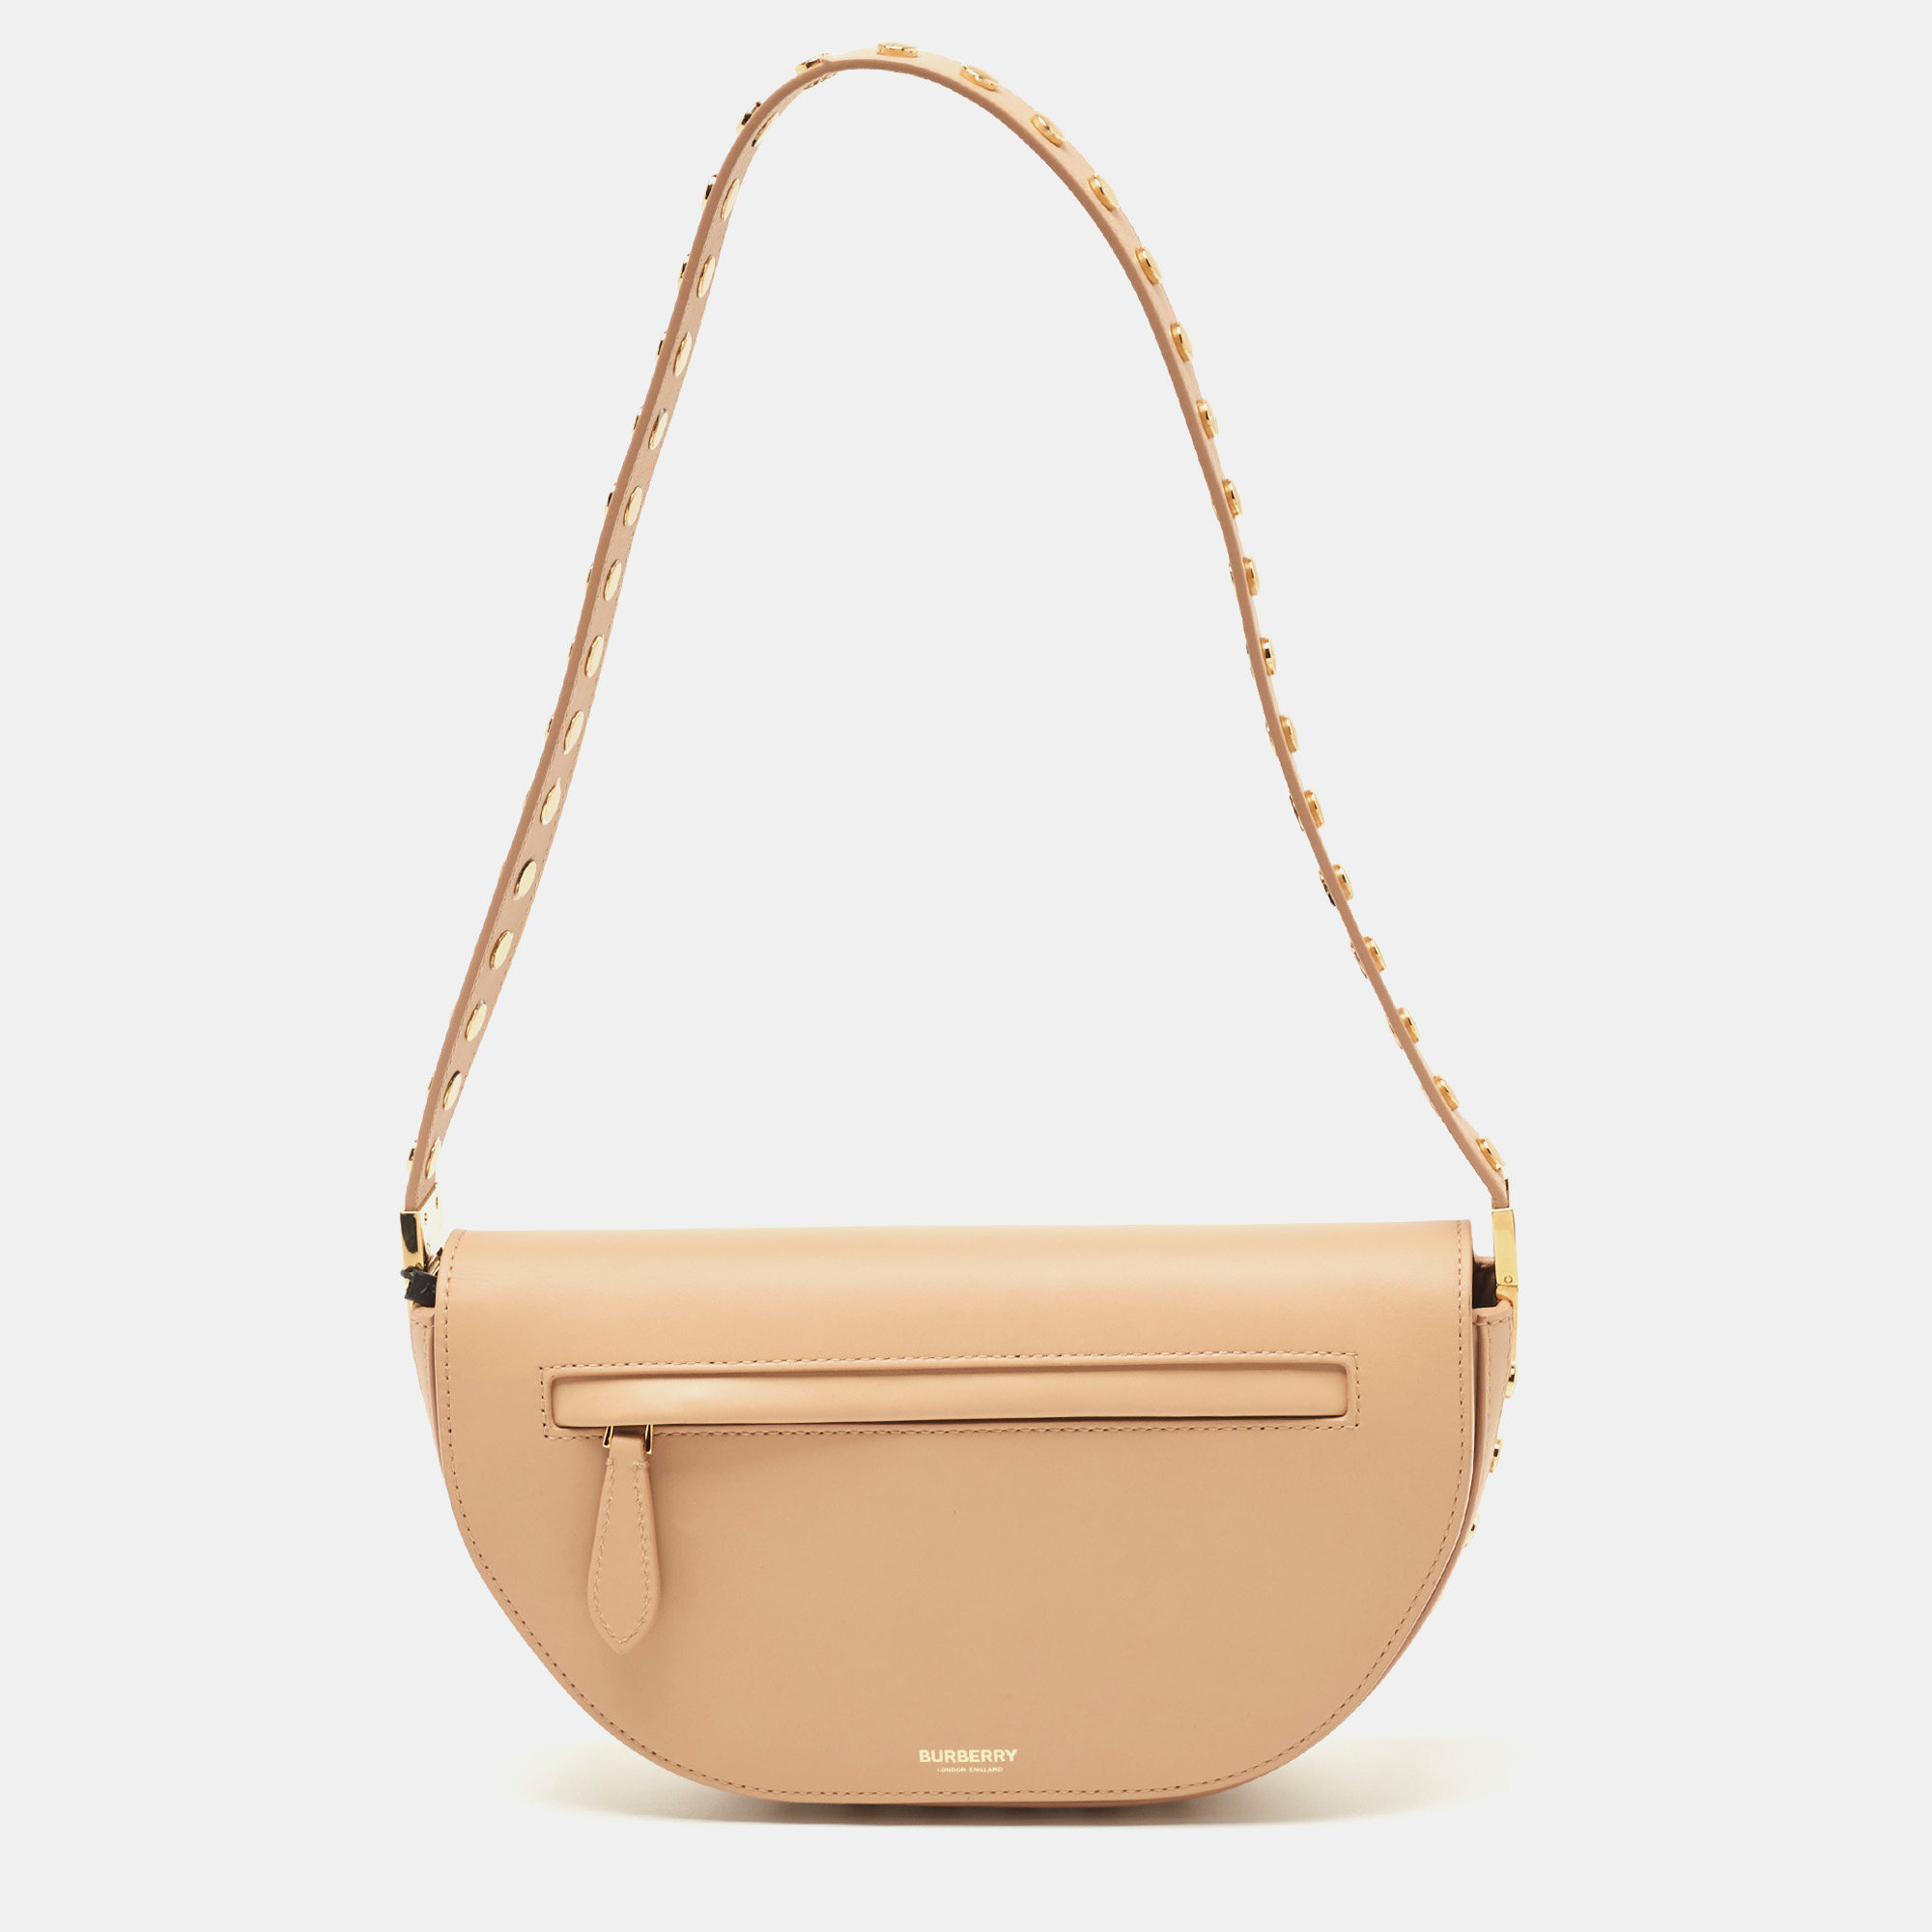 Perfect for conveniently housing your essentials in one place this Burberry accessory is a worthy investment. It has notable details and offers a look of luxury.